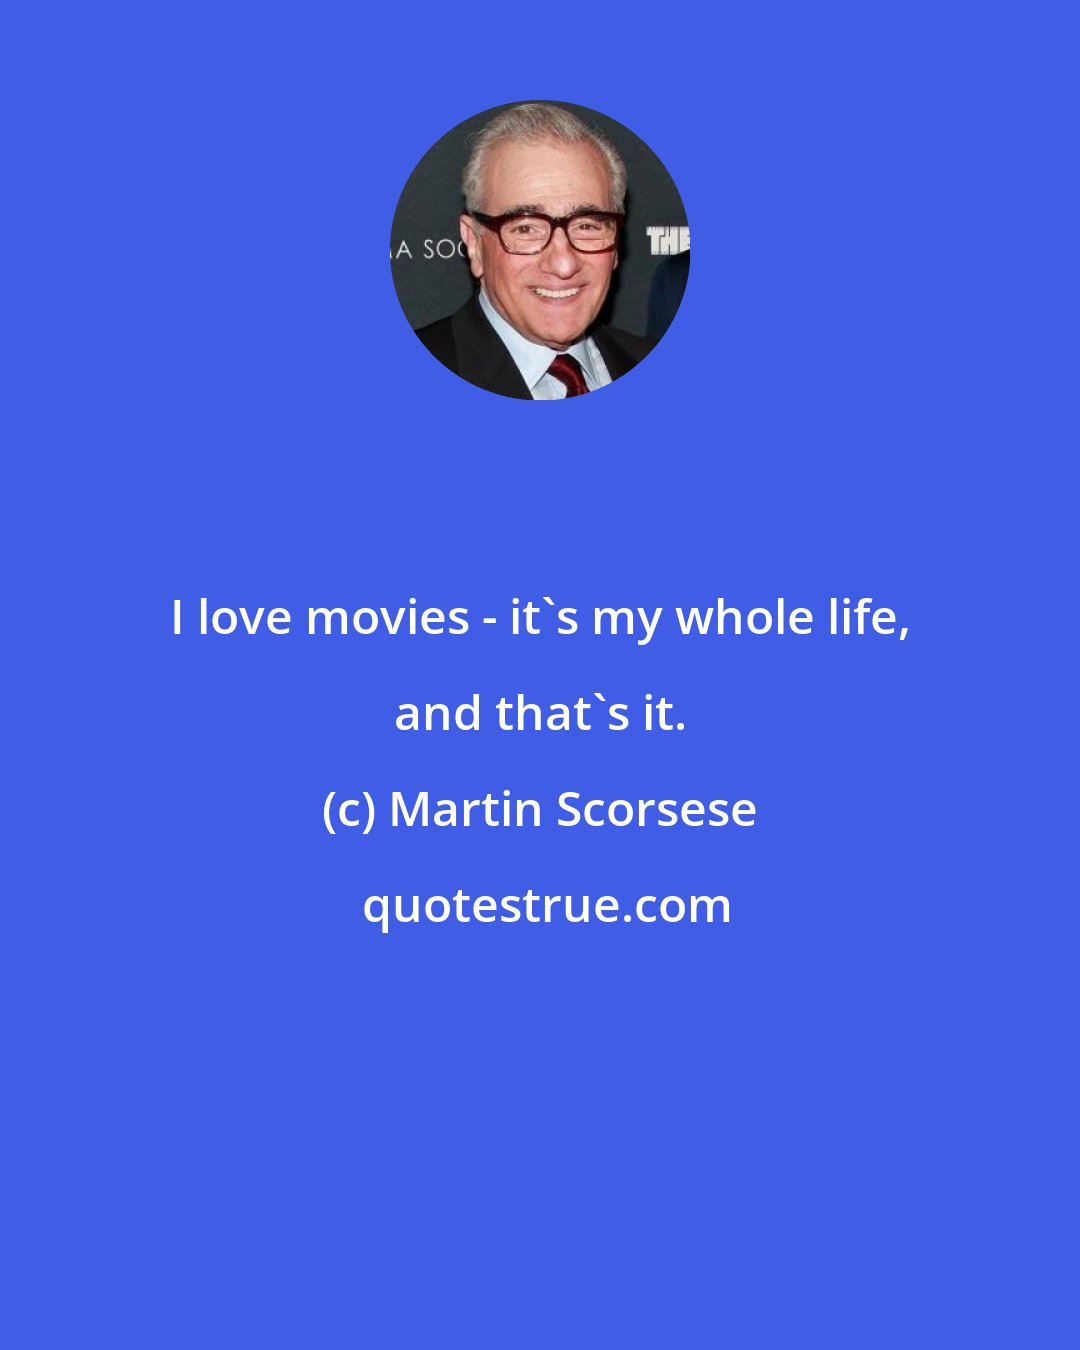 Martin Scorsese: I love movies - it's my whole life, and that's it.